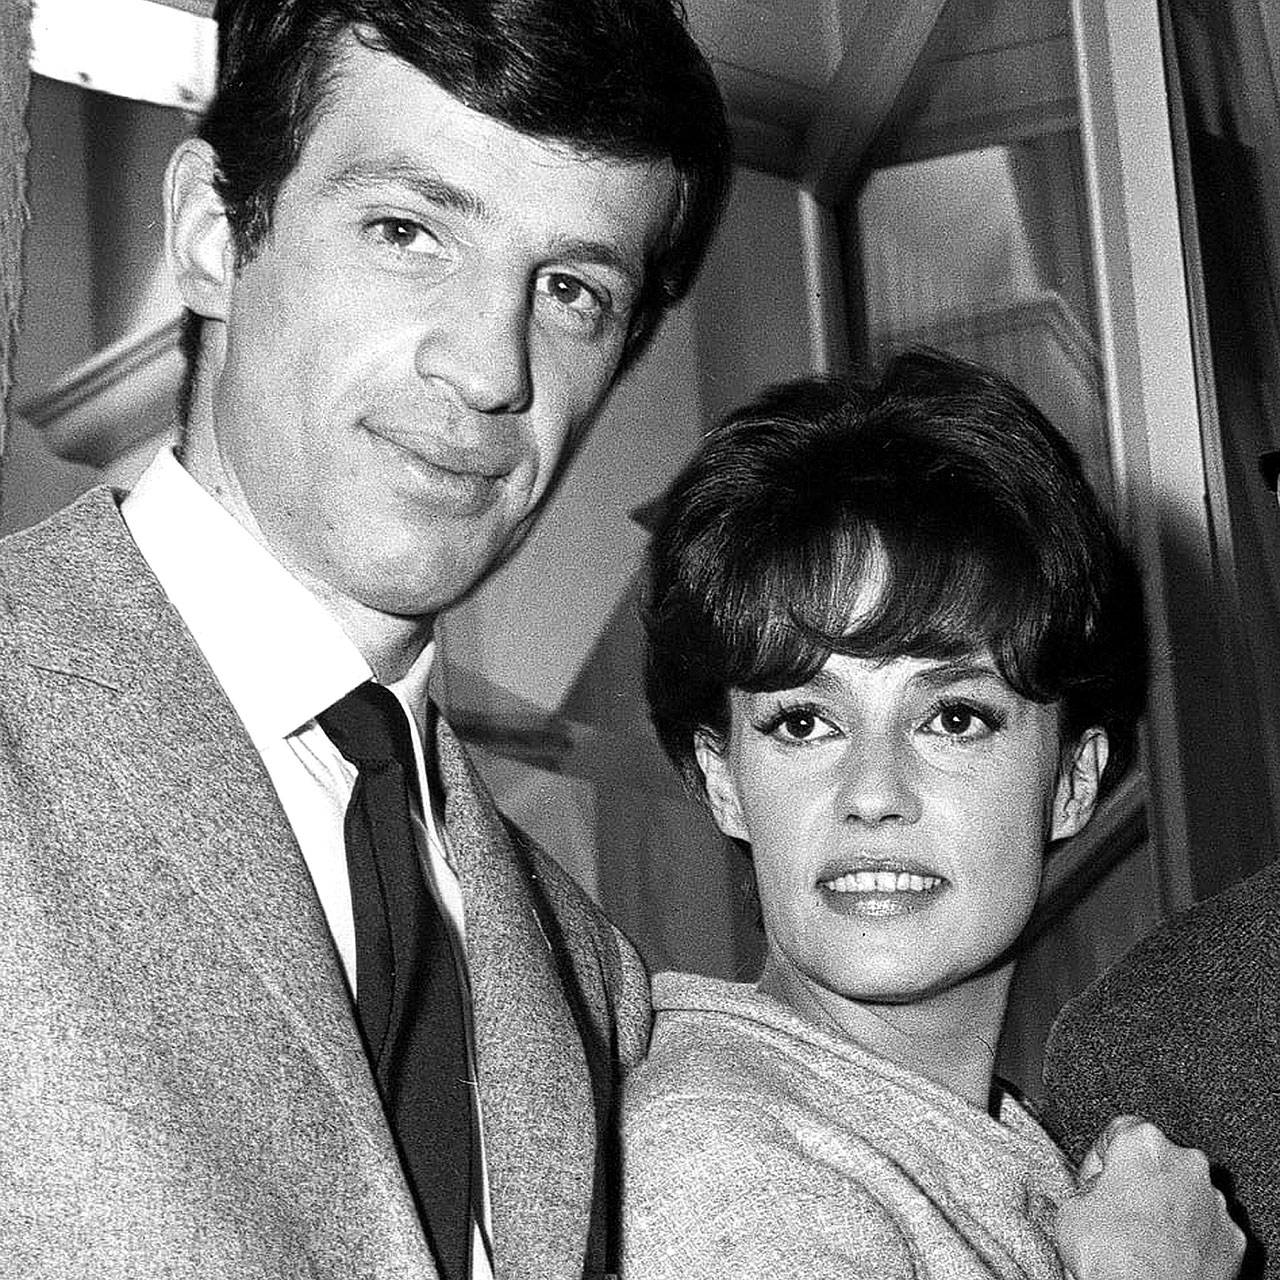 Undated photo of Jeanne Moreau (right) and Jean Paul Belmondo at Billancourt studios near Paris. French actress Moreau, whose seven-decade career included work with Francois Truffaut, Orson Welles, Wim Wenders and other acclaimed directors, died at 89 on Monday. (AP Photo/File)